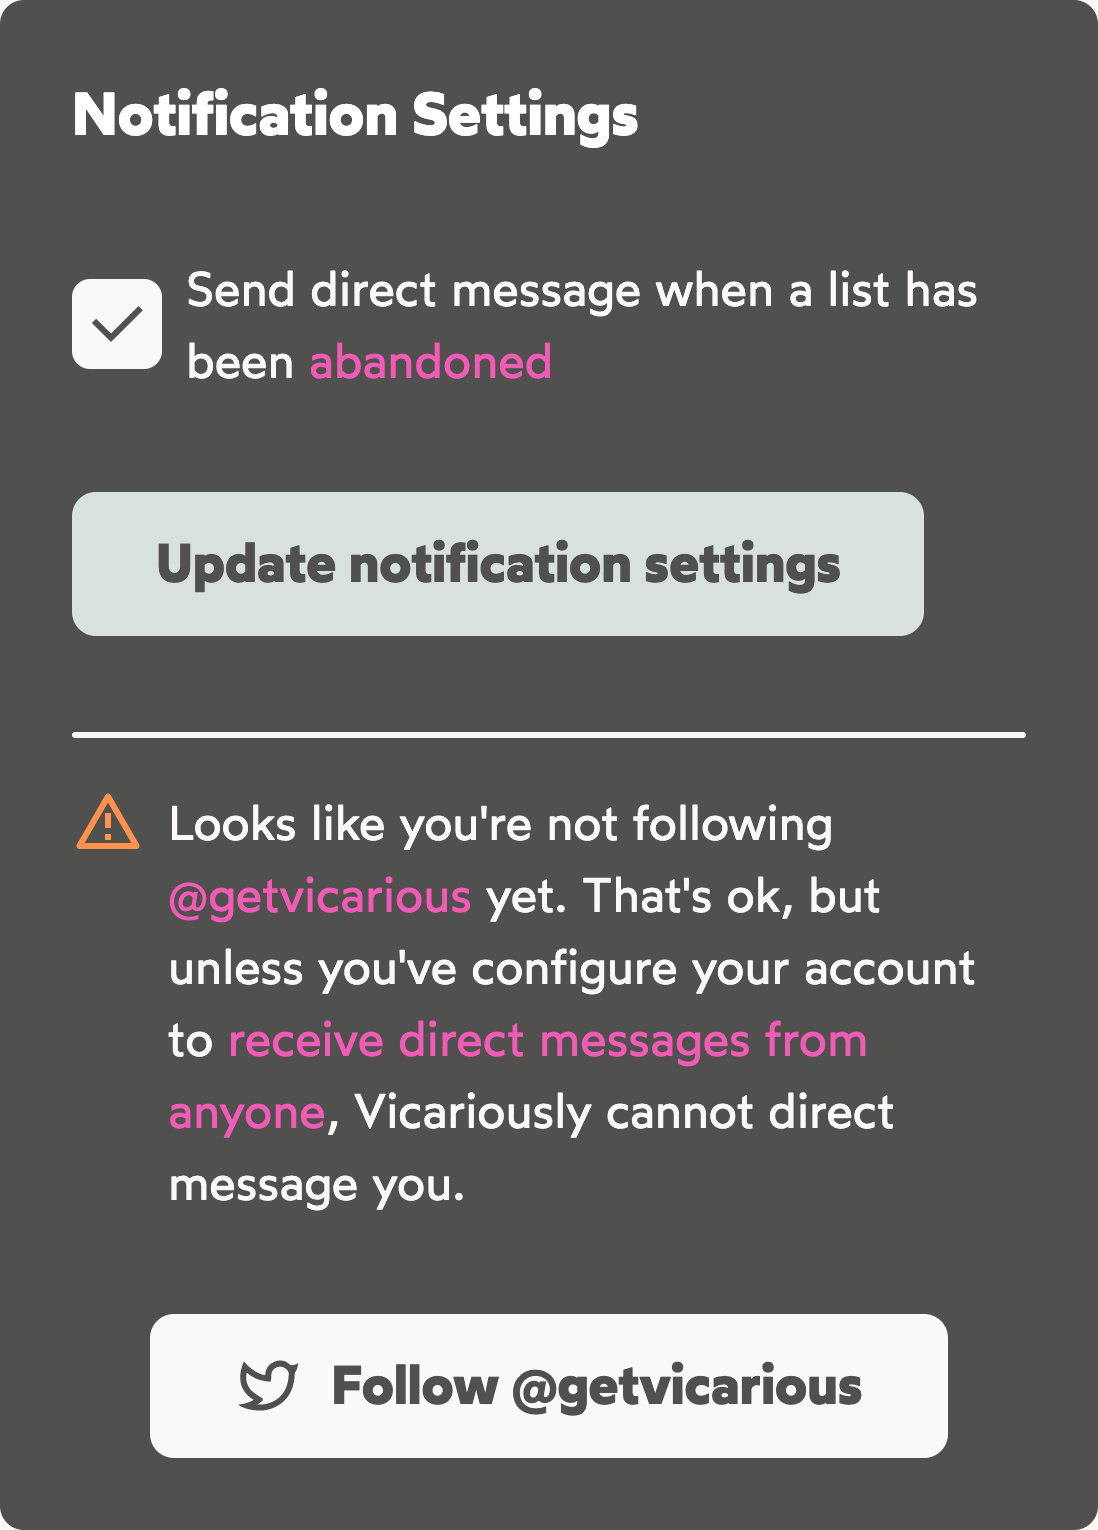 Vicariously notification settings with prompt to follow @getvicarious